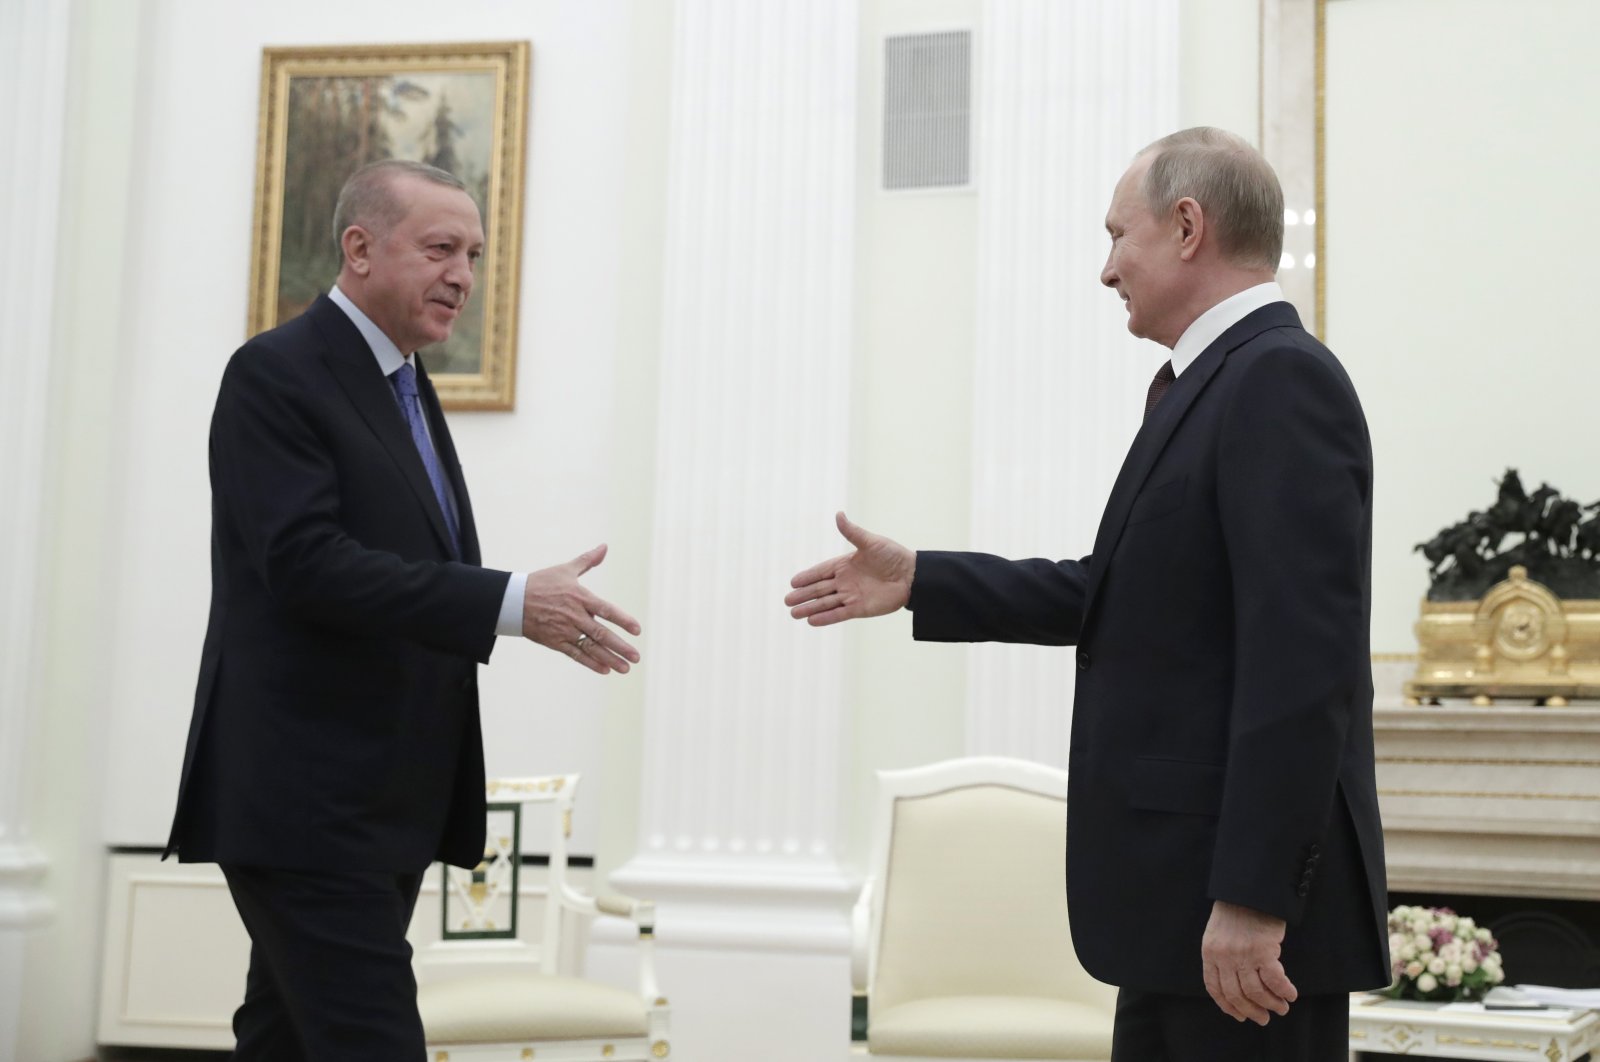 President Recep Tayyip Erdoğan and Russian President Vladimir Putin greet each other prior to their talks on Idlib, at the Kremlin in Moscow, Russia, March 5, 2020. (AP Photo)